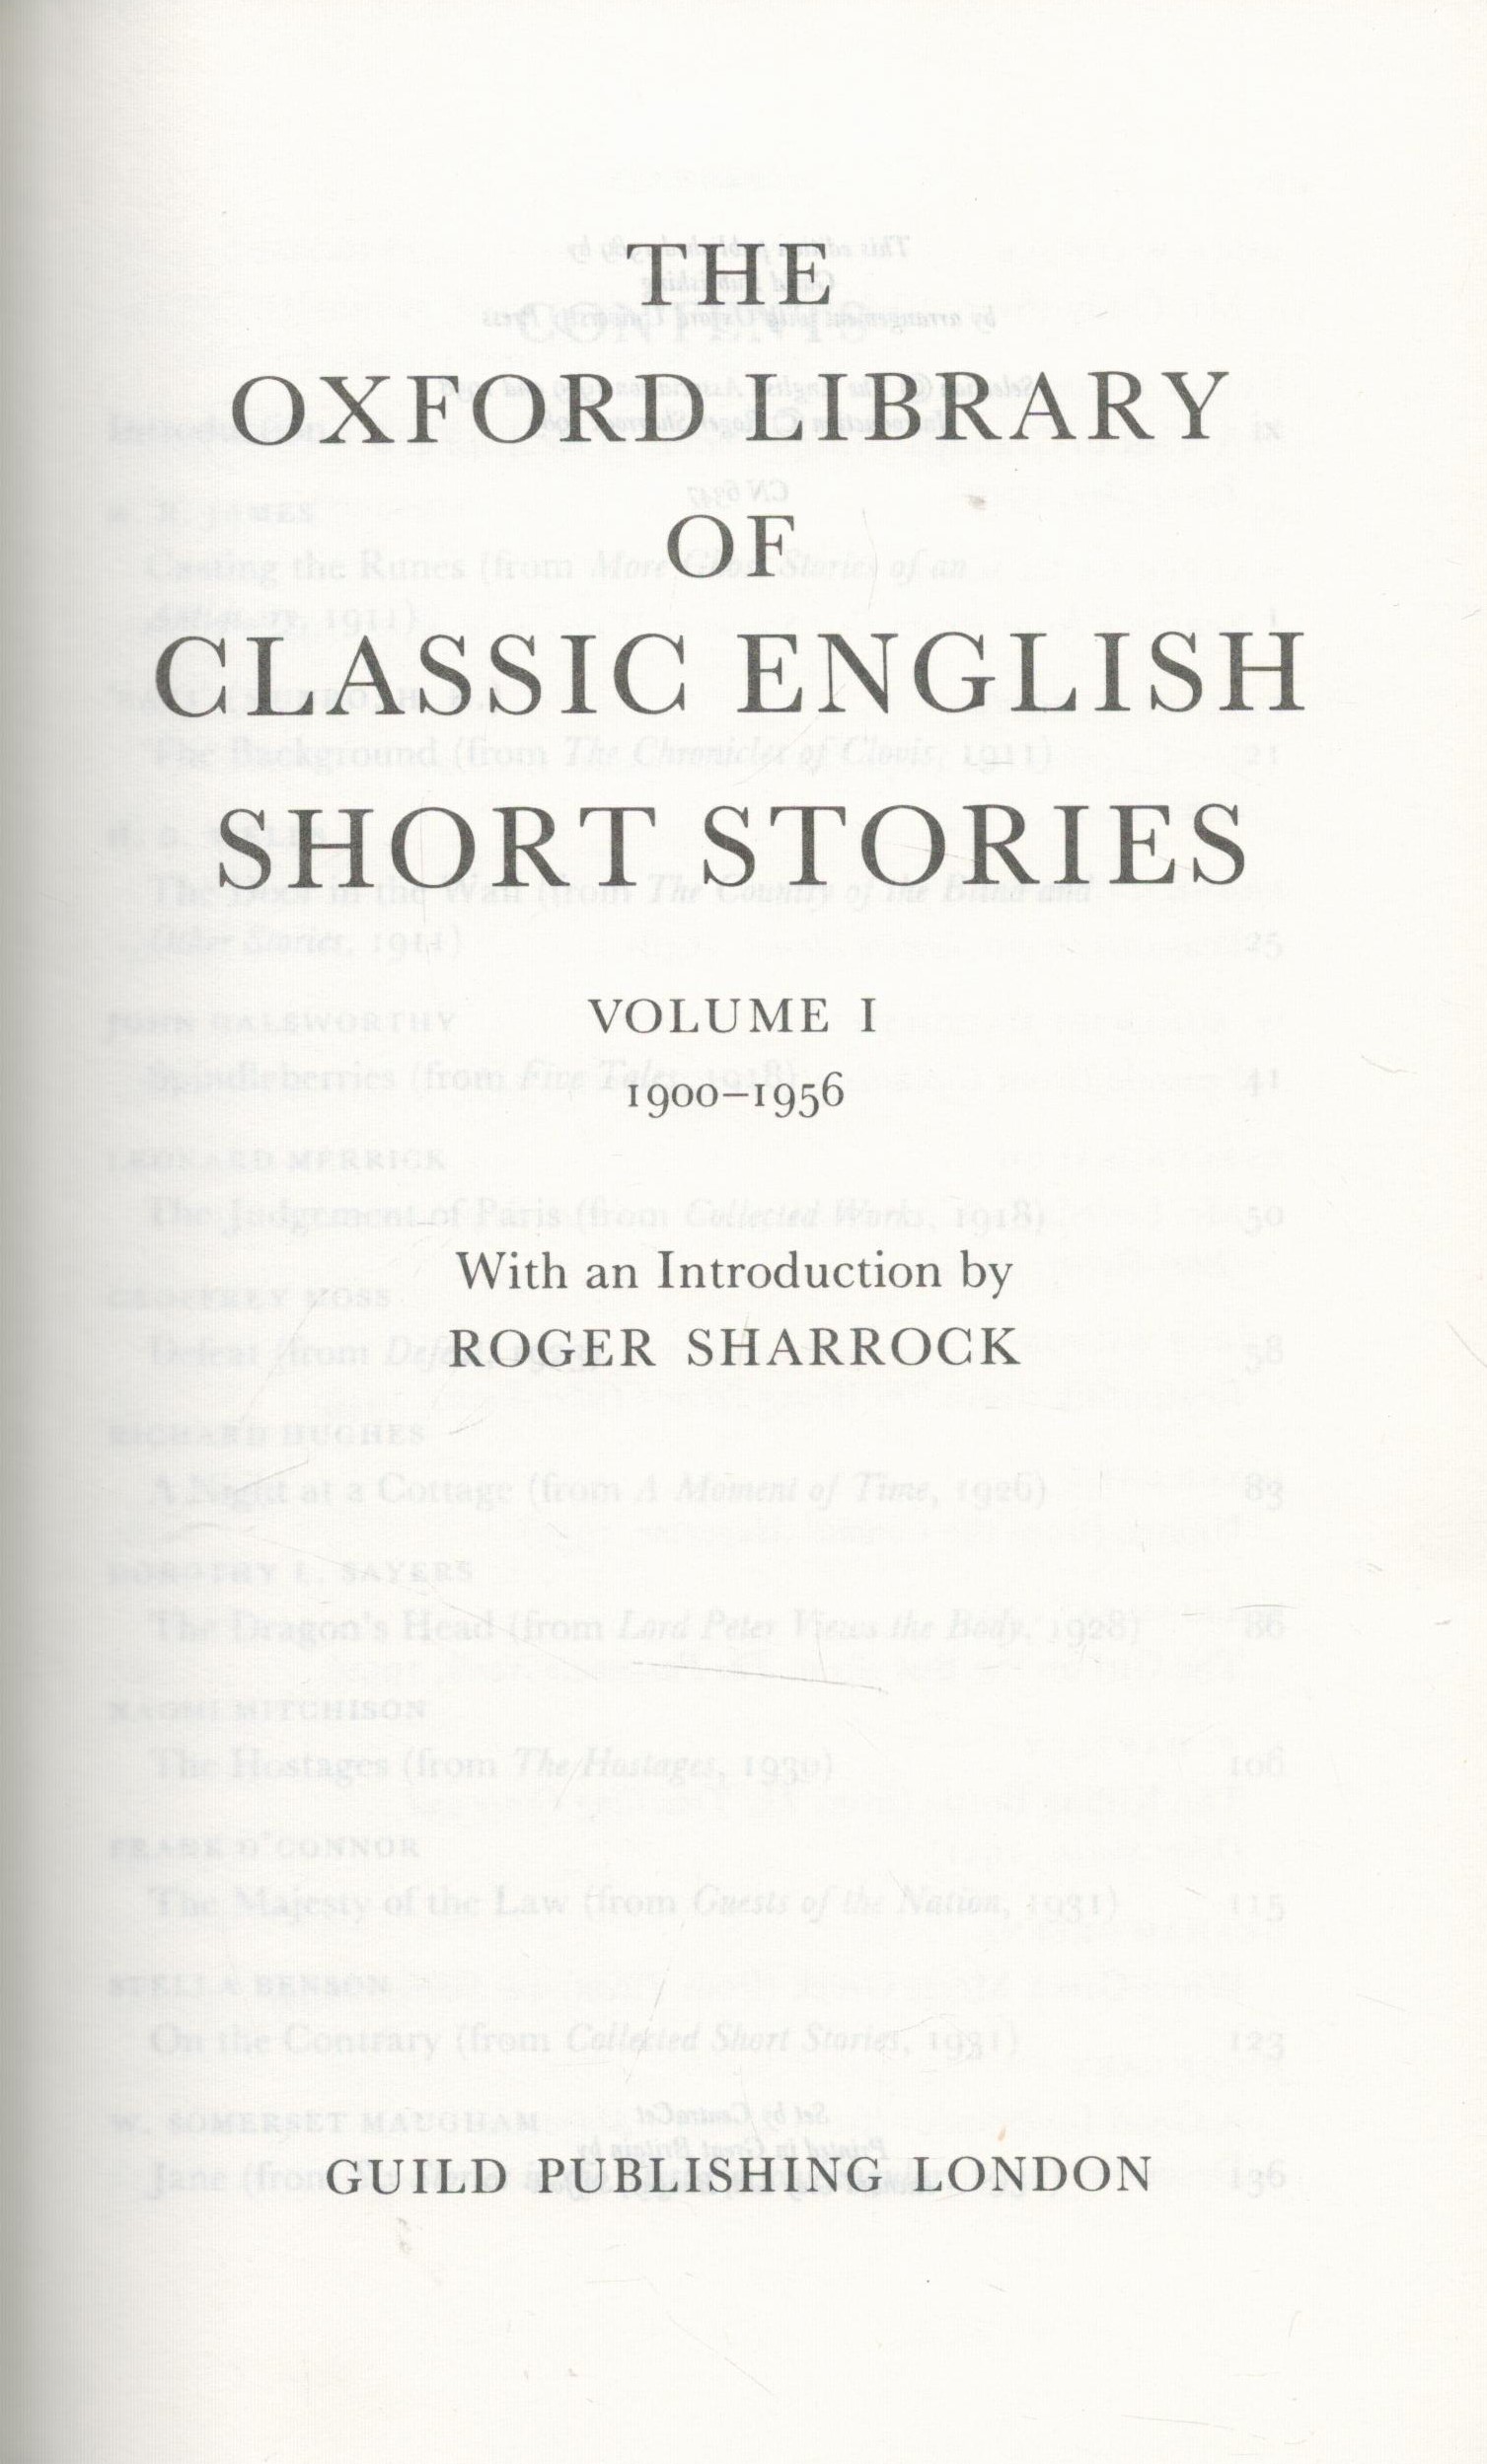 Oxford Library of Classic English Short Stories vols 1 and 2 in Slipcase 1989 edition unknown - Image 3 of 4